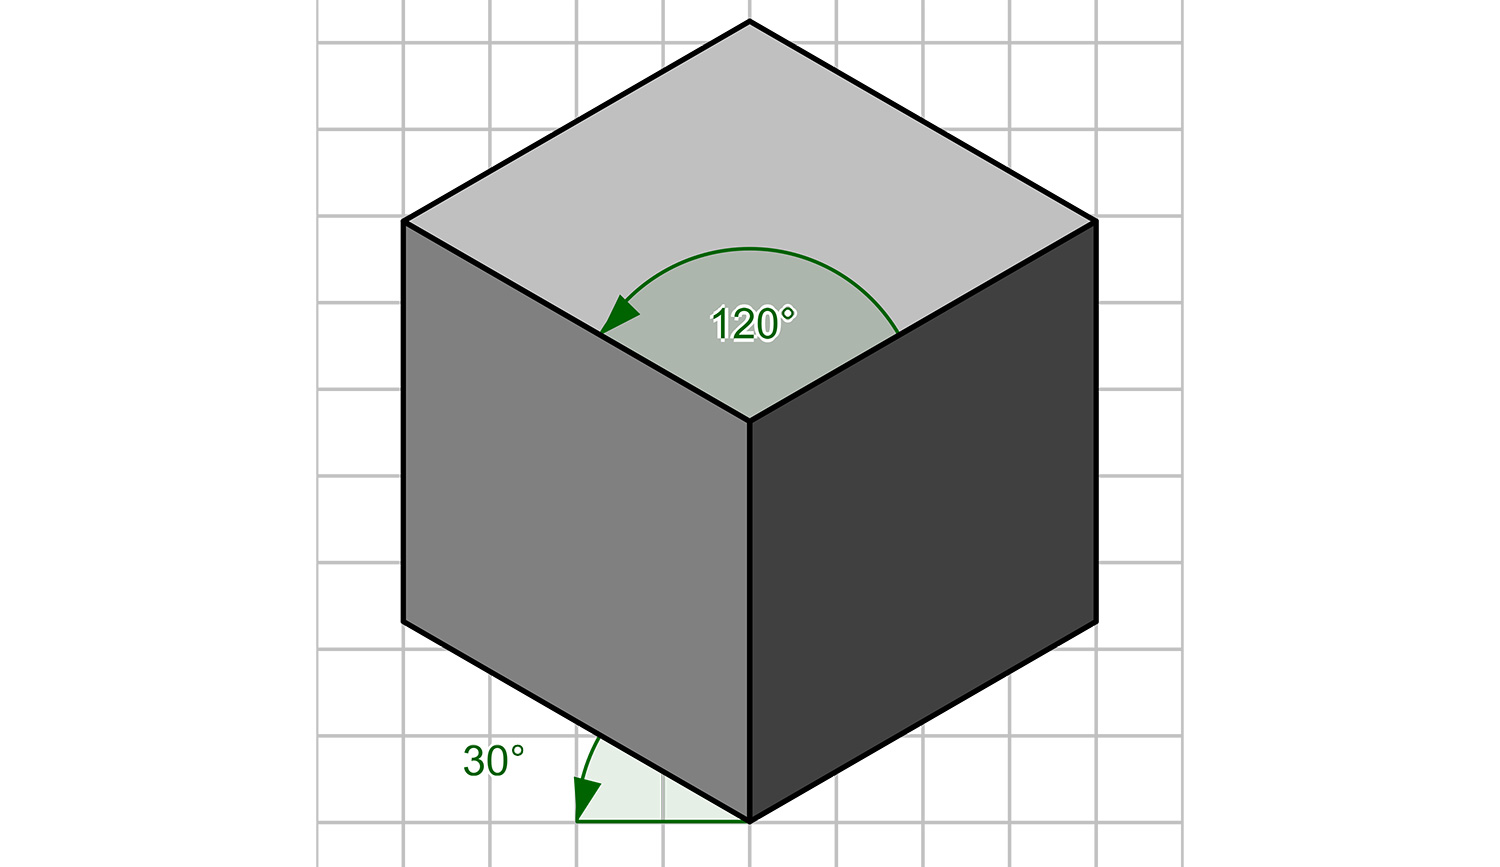 Isometric drawing: 30-degree angles